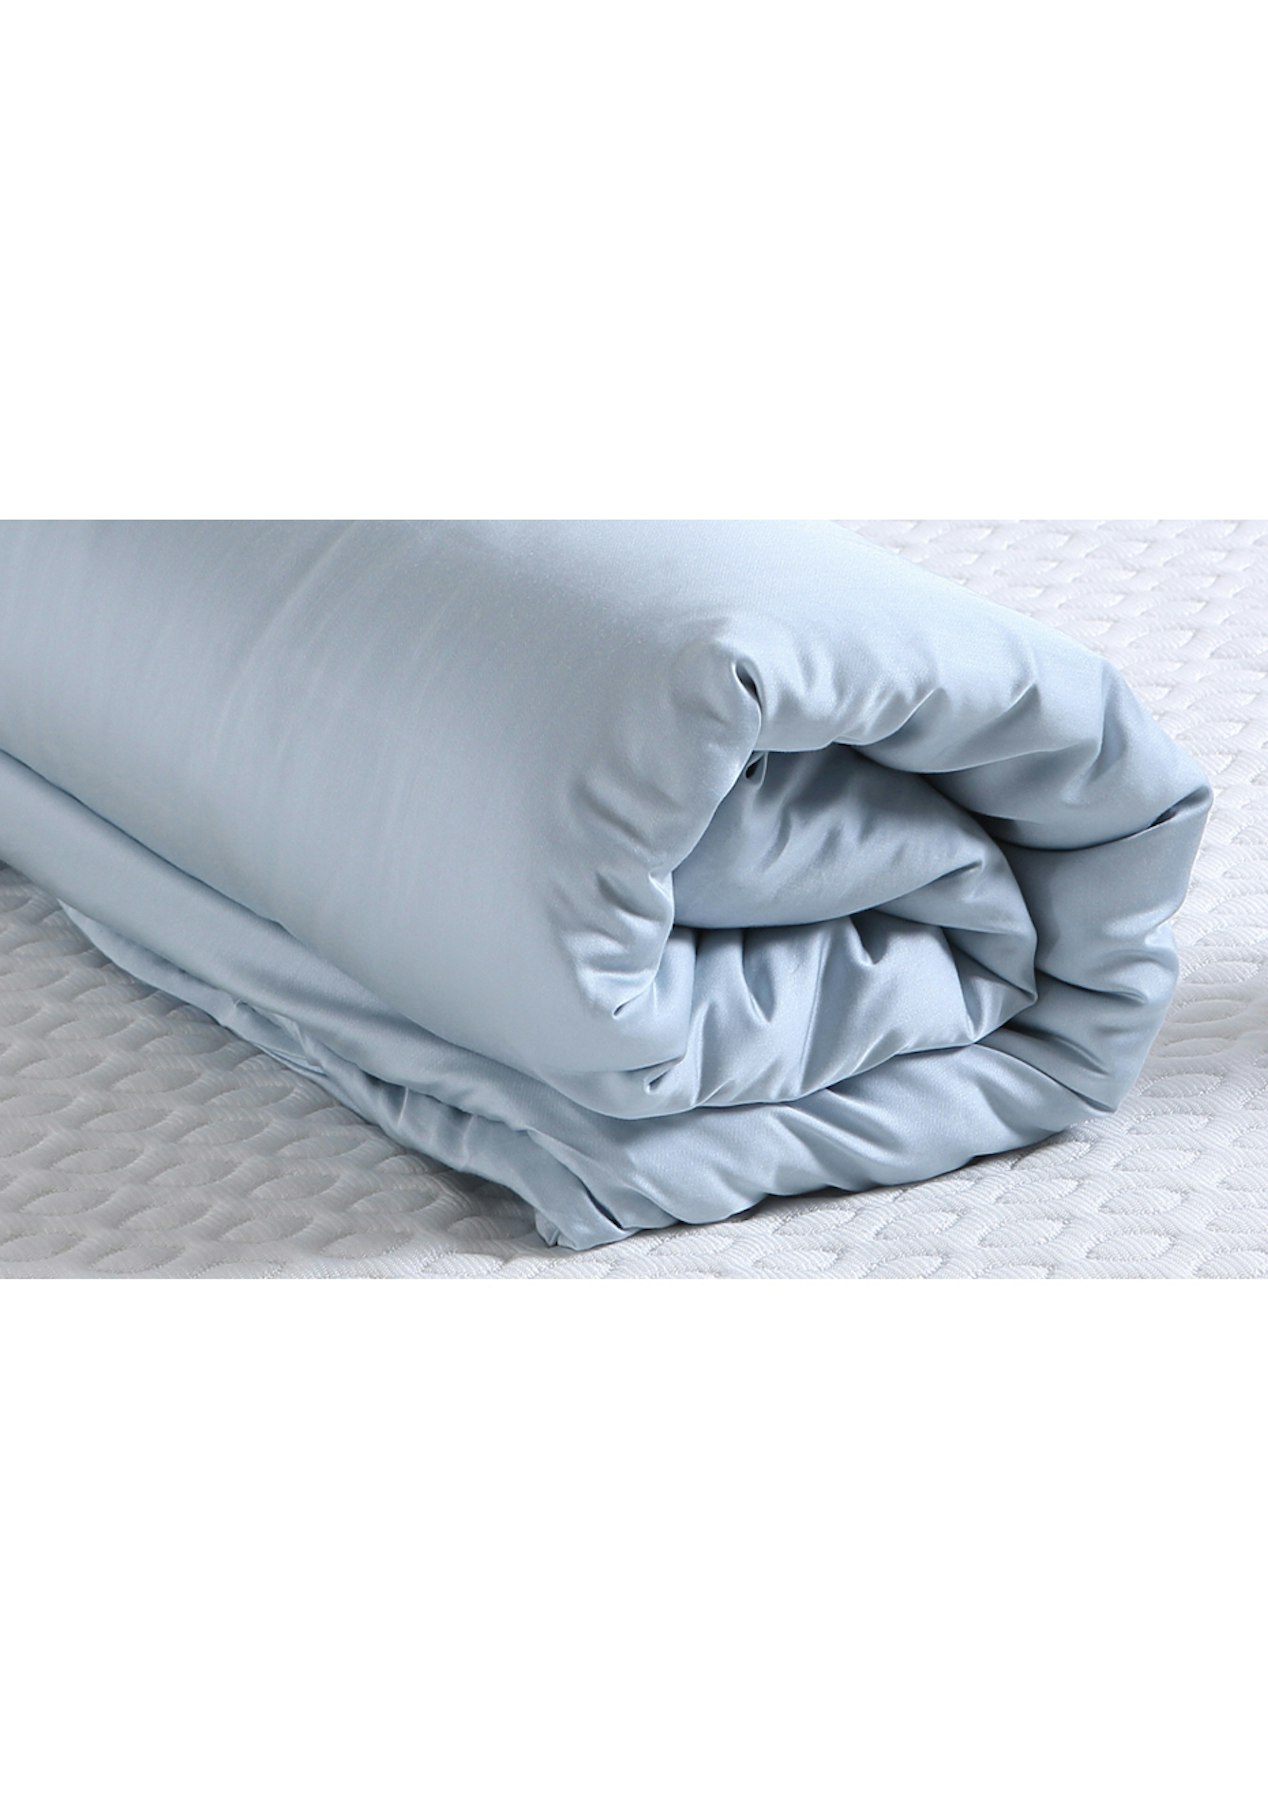 Sea 2kgs Bamboo Fiber Weighted Blanket - Onceit